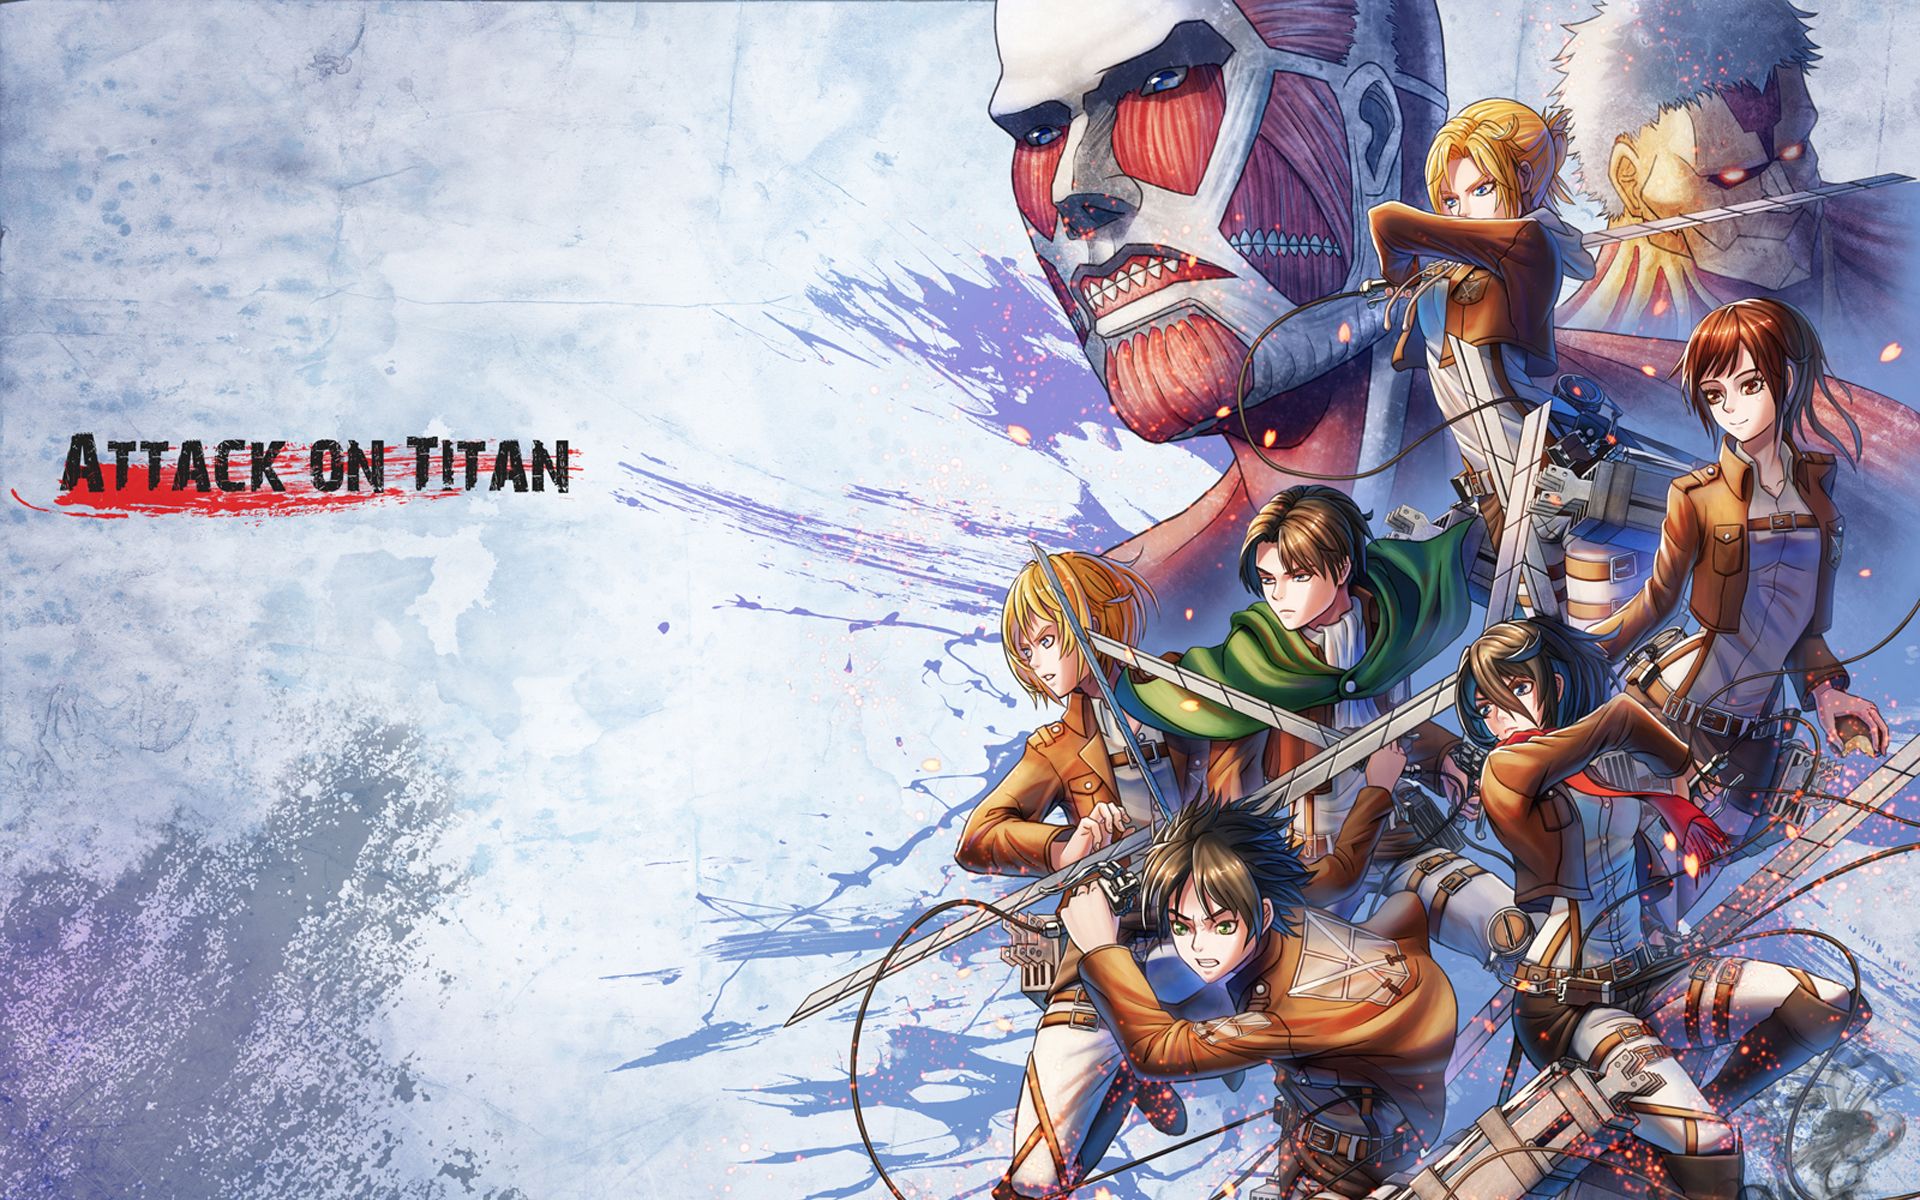 Attack On Titans Season 4 Wallpapers - Wallpaper Cave